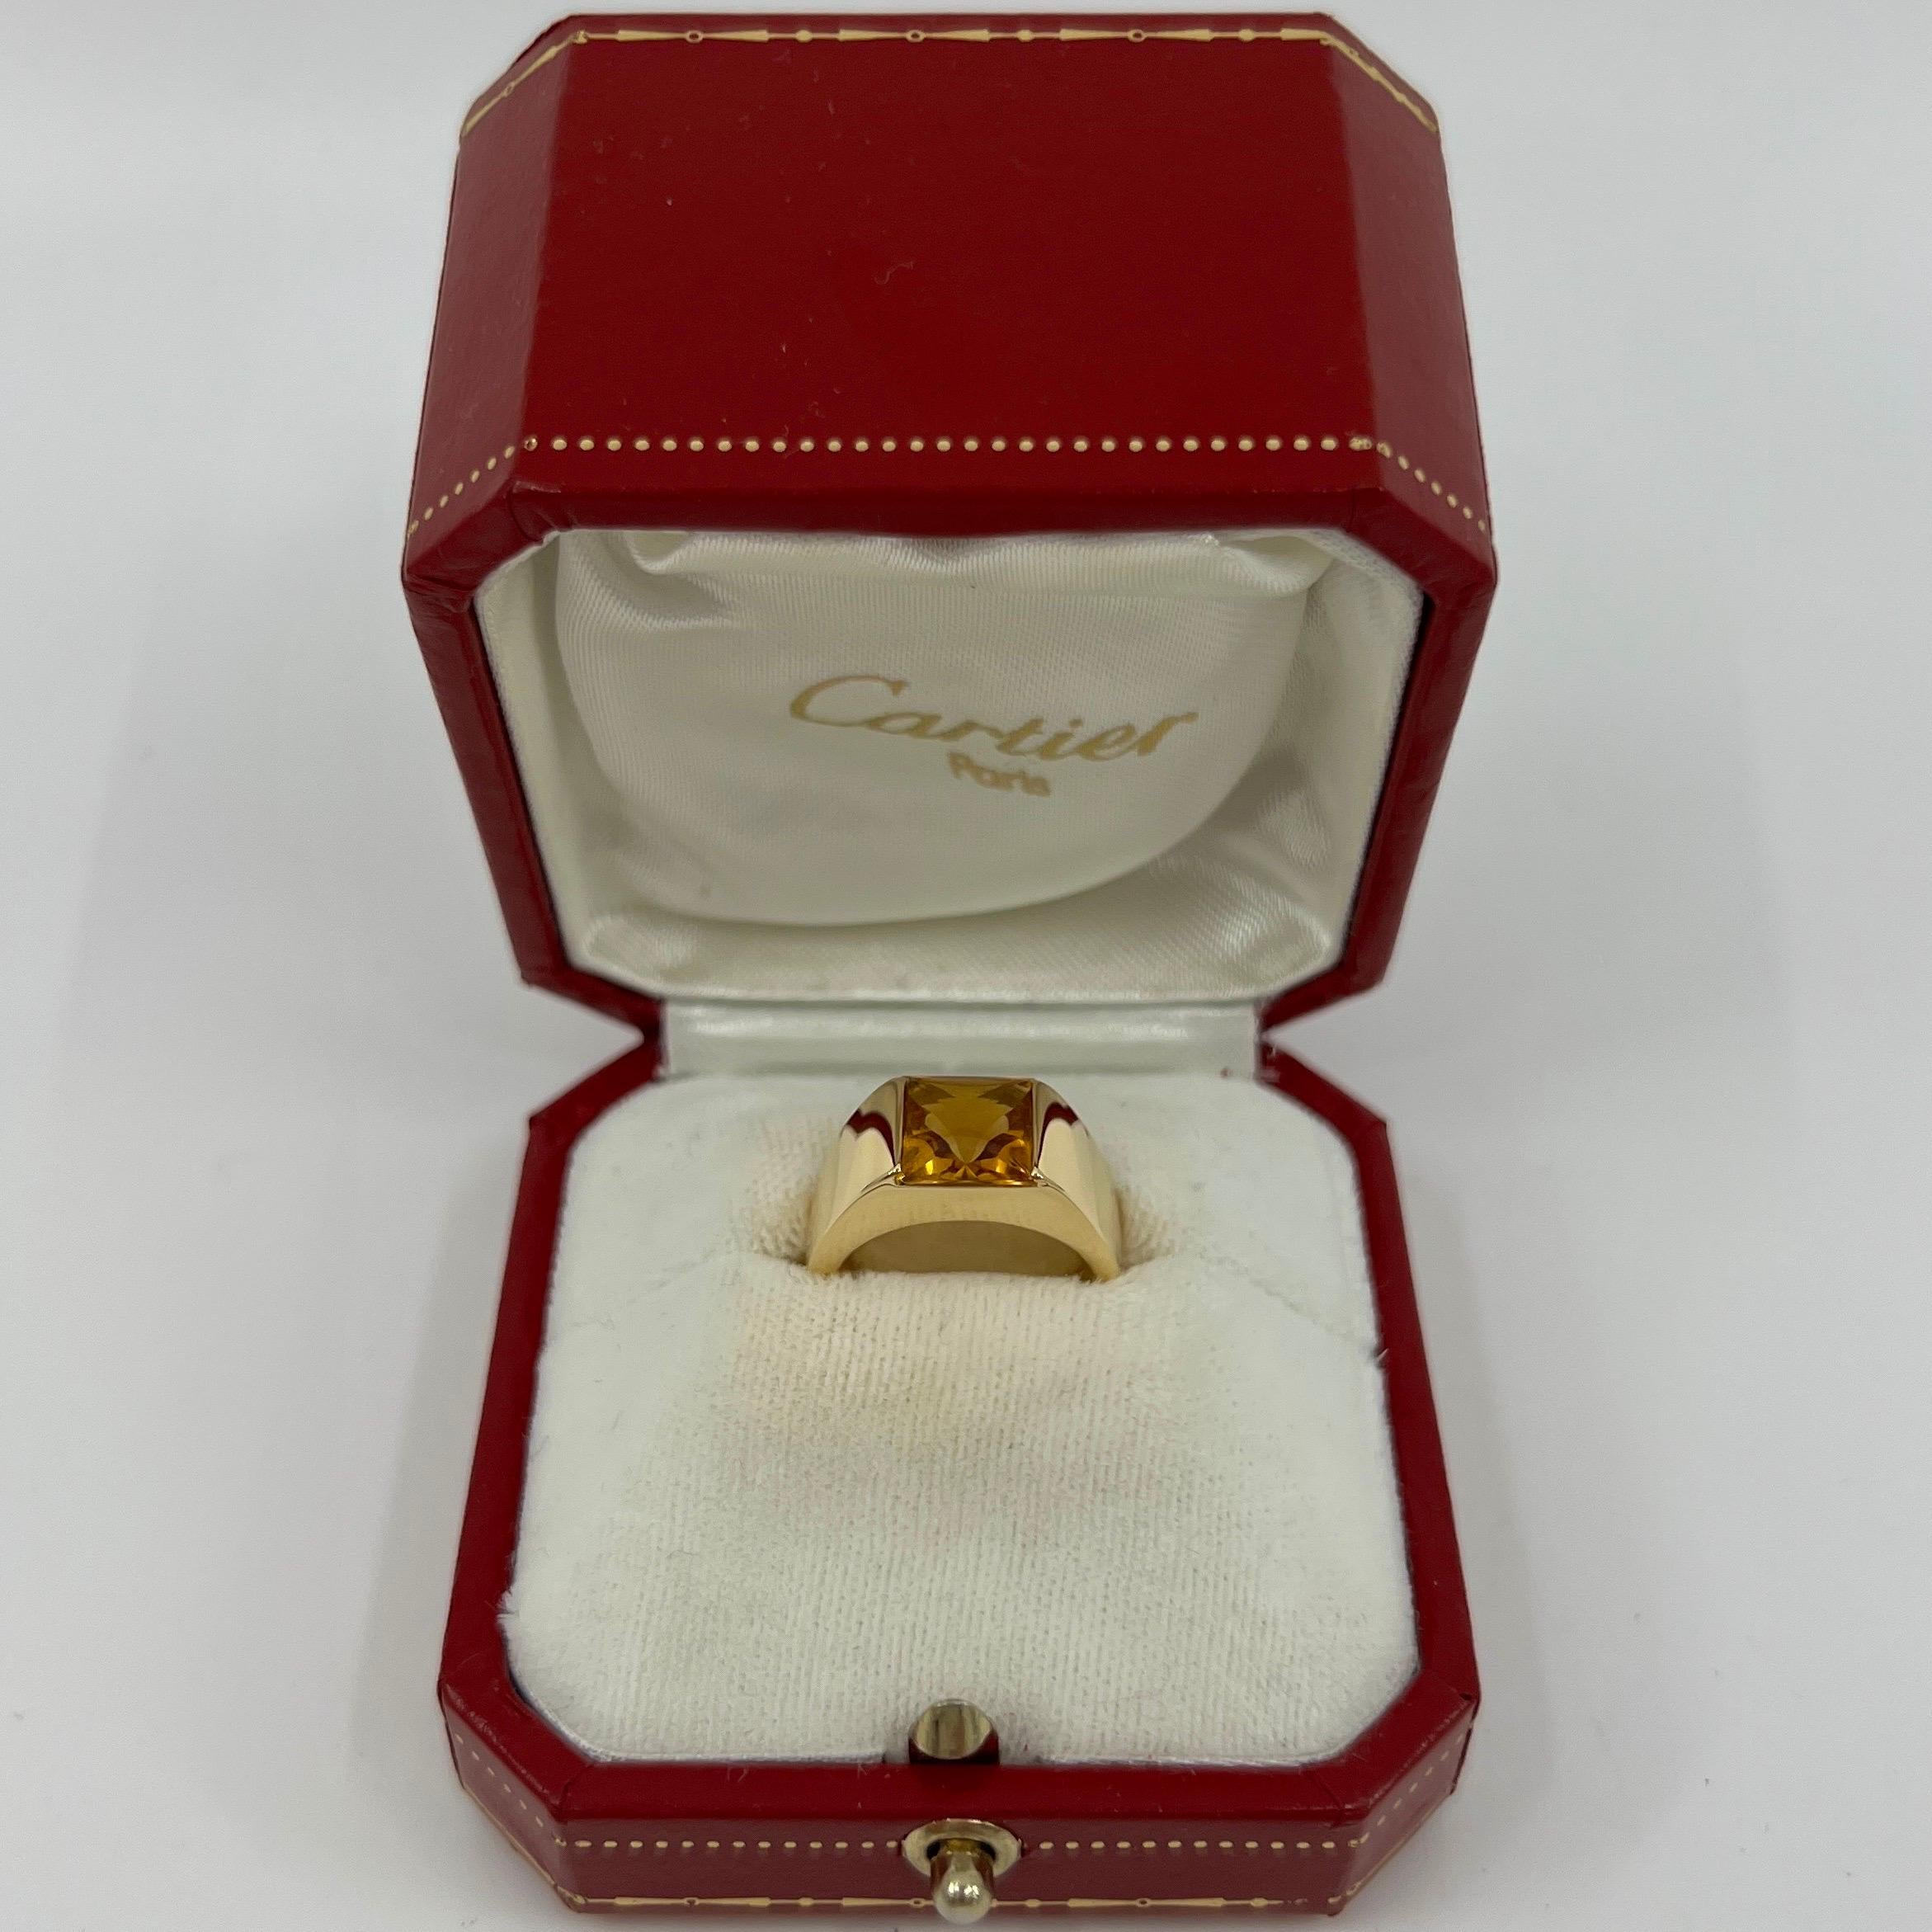 Vintage Cartier Yellow Orange Citrine 18k Yellow Gold Tank Ring.

Stunning yellow gold ring with an 8mm tension set vivid yellow orange citrine. Fine jewellery houses like Cartier only use the finest of gemstones and this citrine is no exception. A